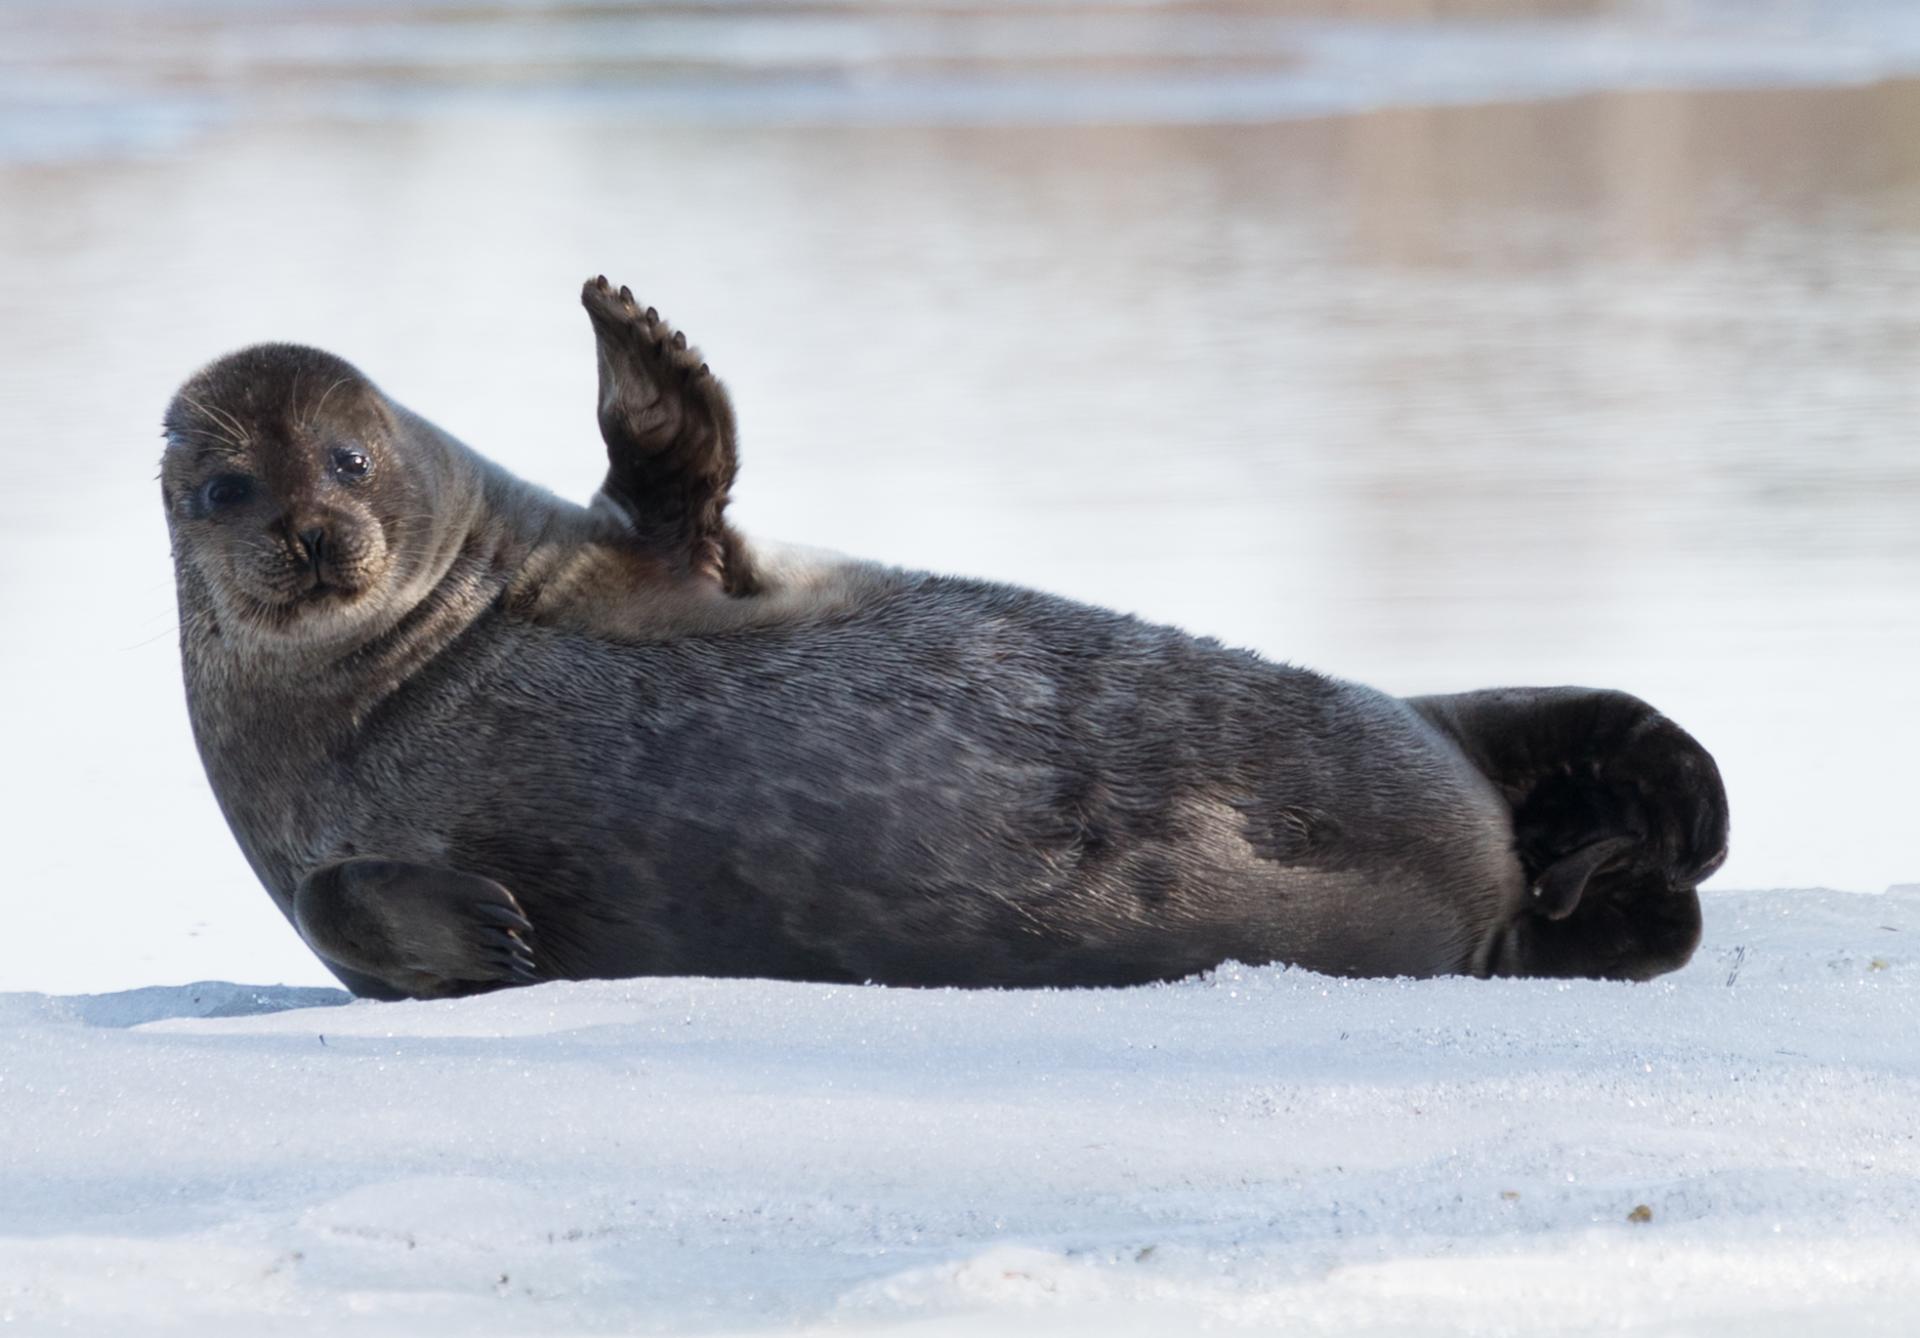 A Saimaa-ringed seal is lying on snow and lifting its front leg.